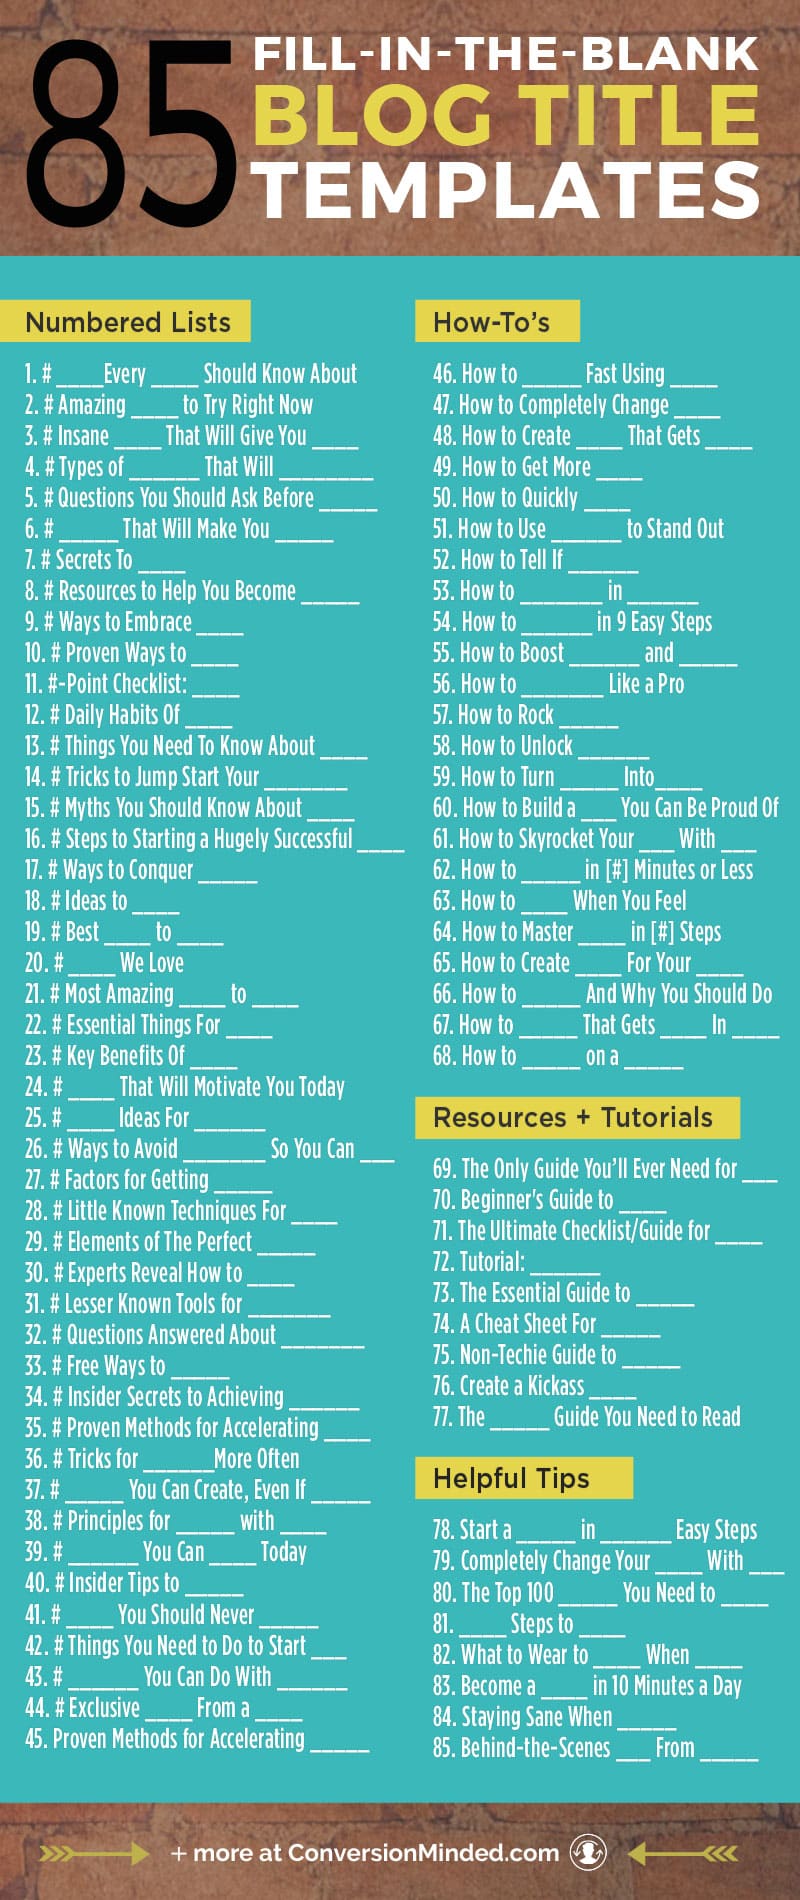 120+ Clever Blog Post Titles That Convert Like Crazy